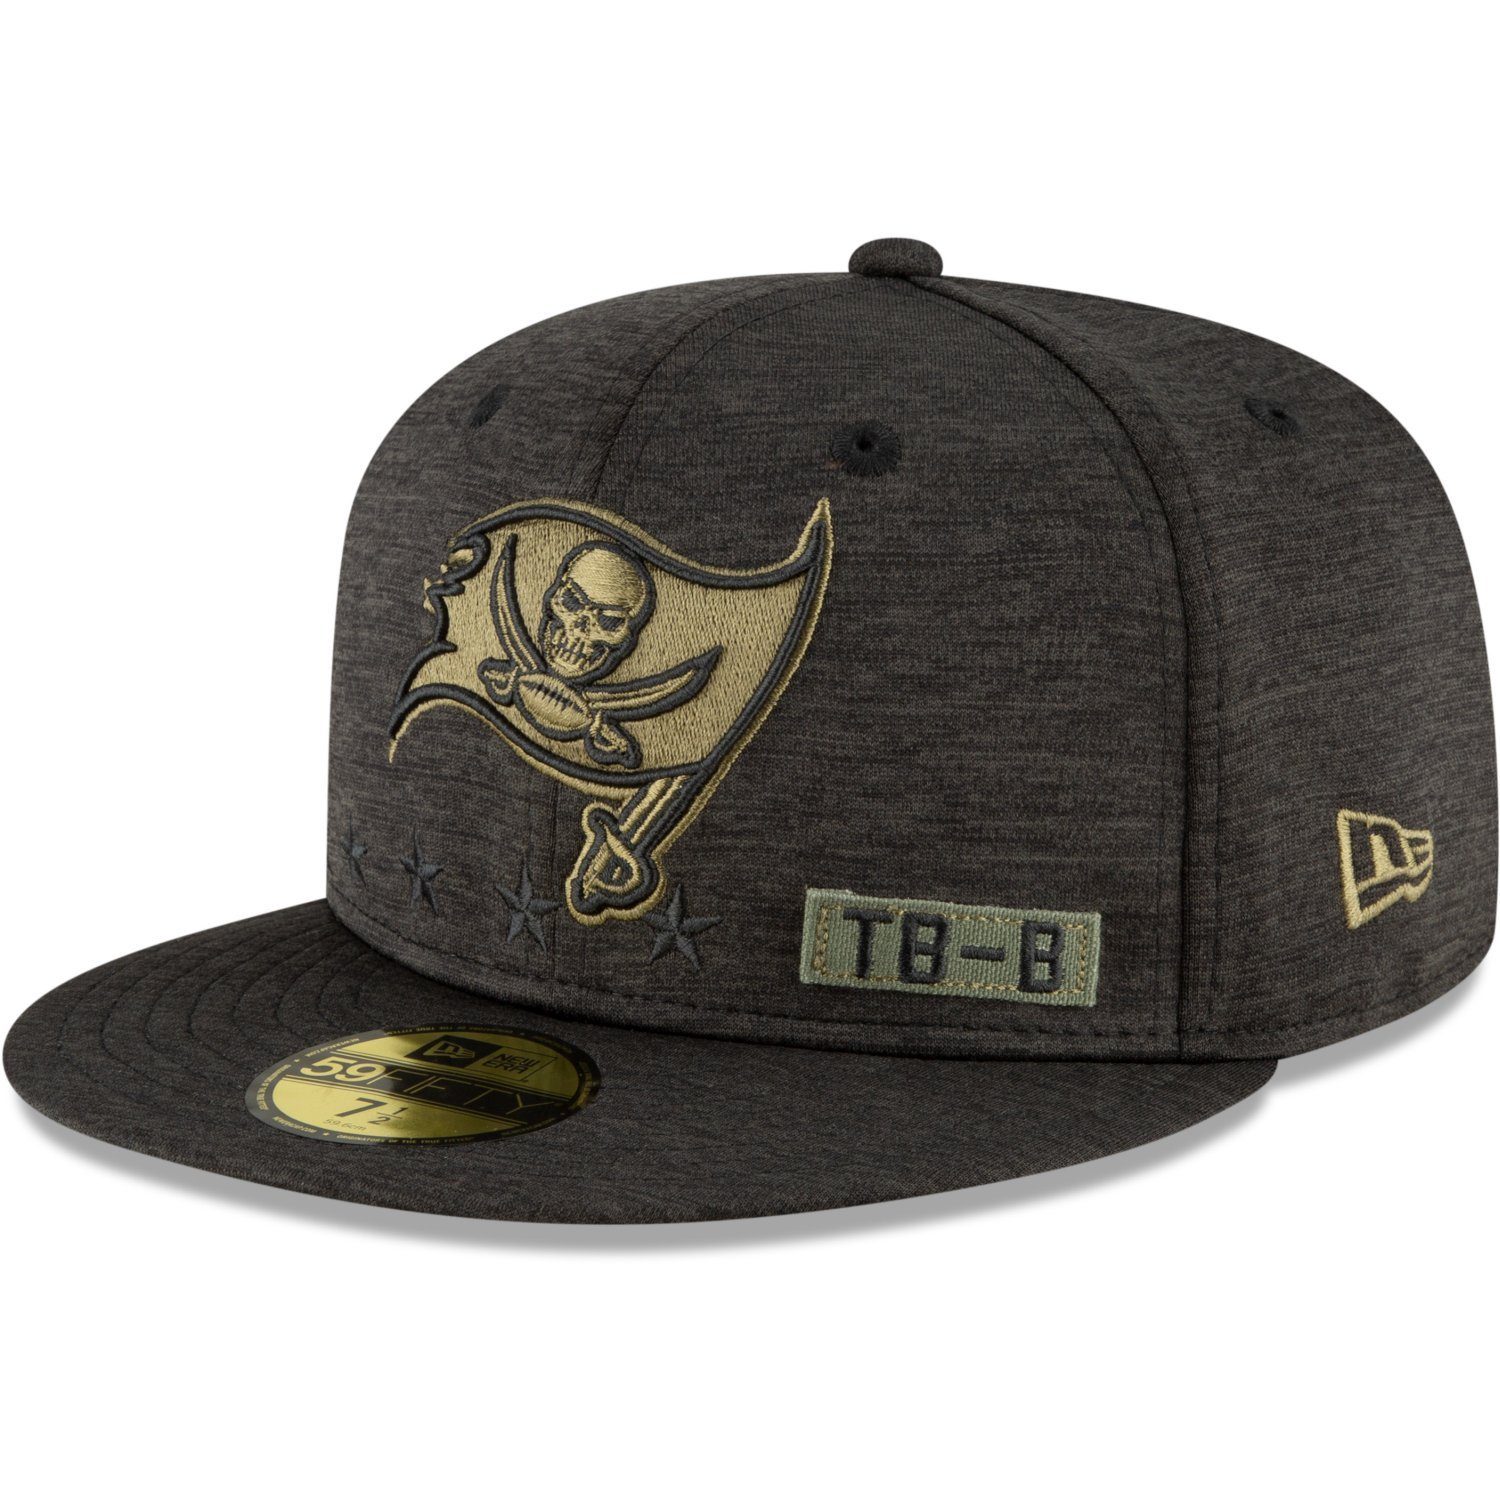 New Era Fitted Cap 59FIFTY NFL Salute to Service 2020 Tampa Bay Buccaneers